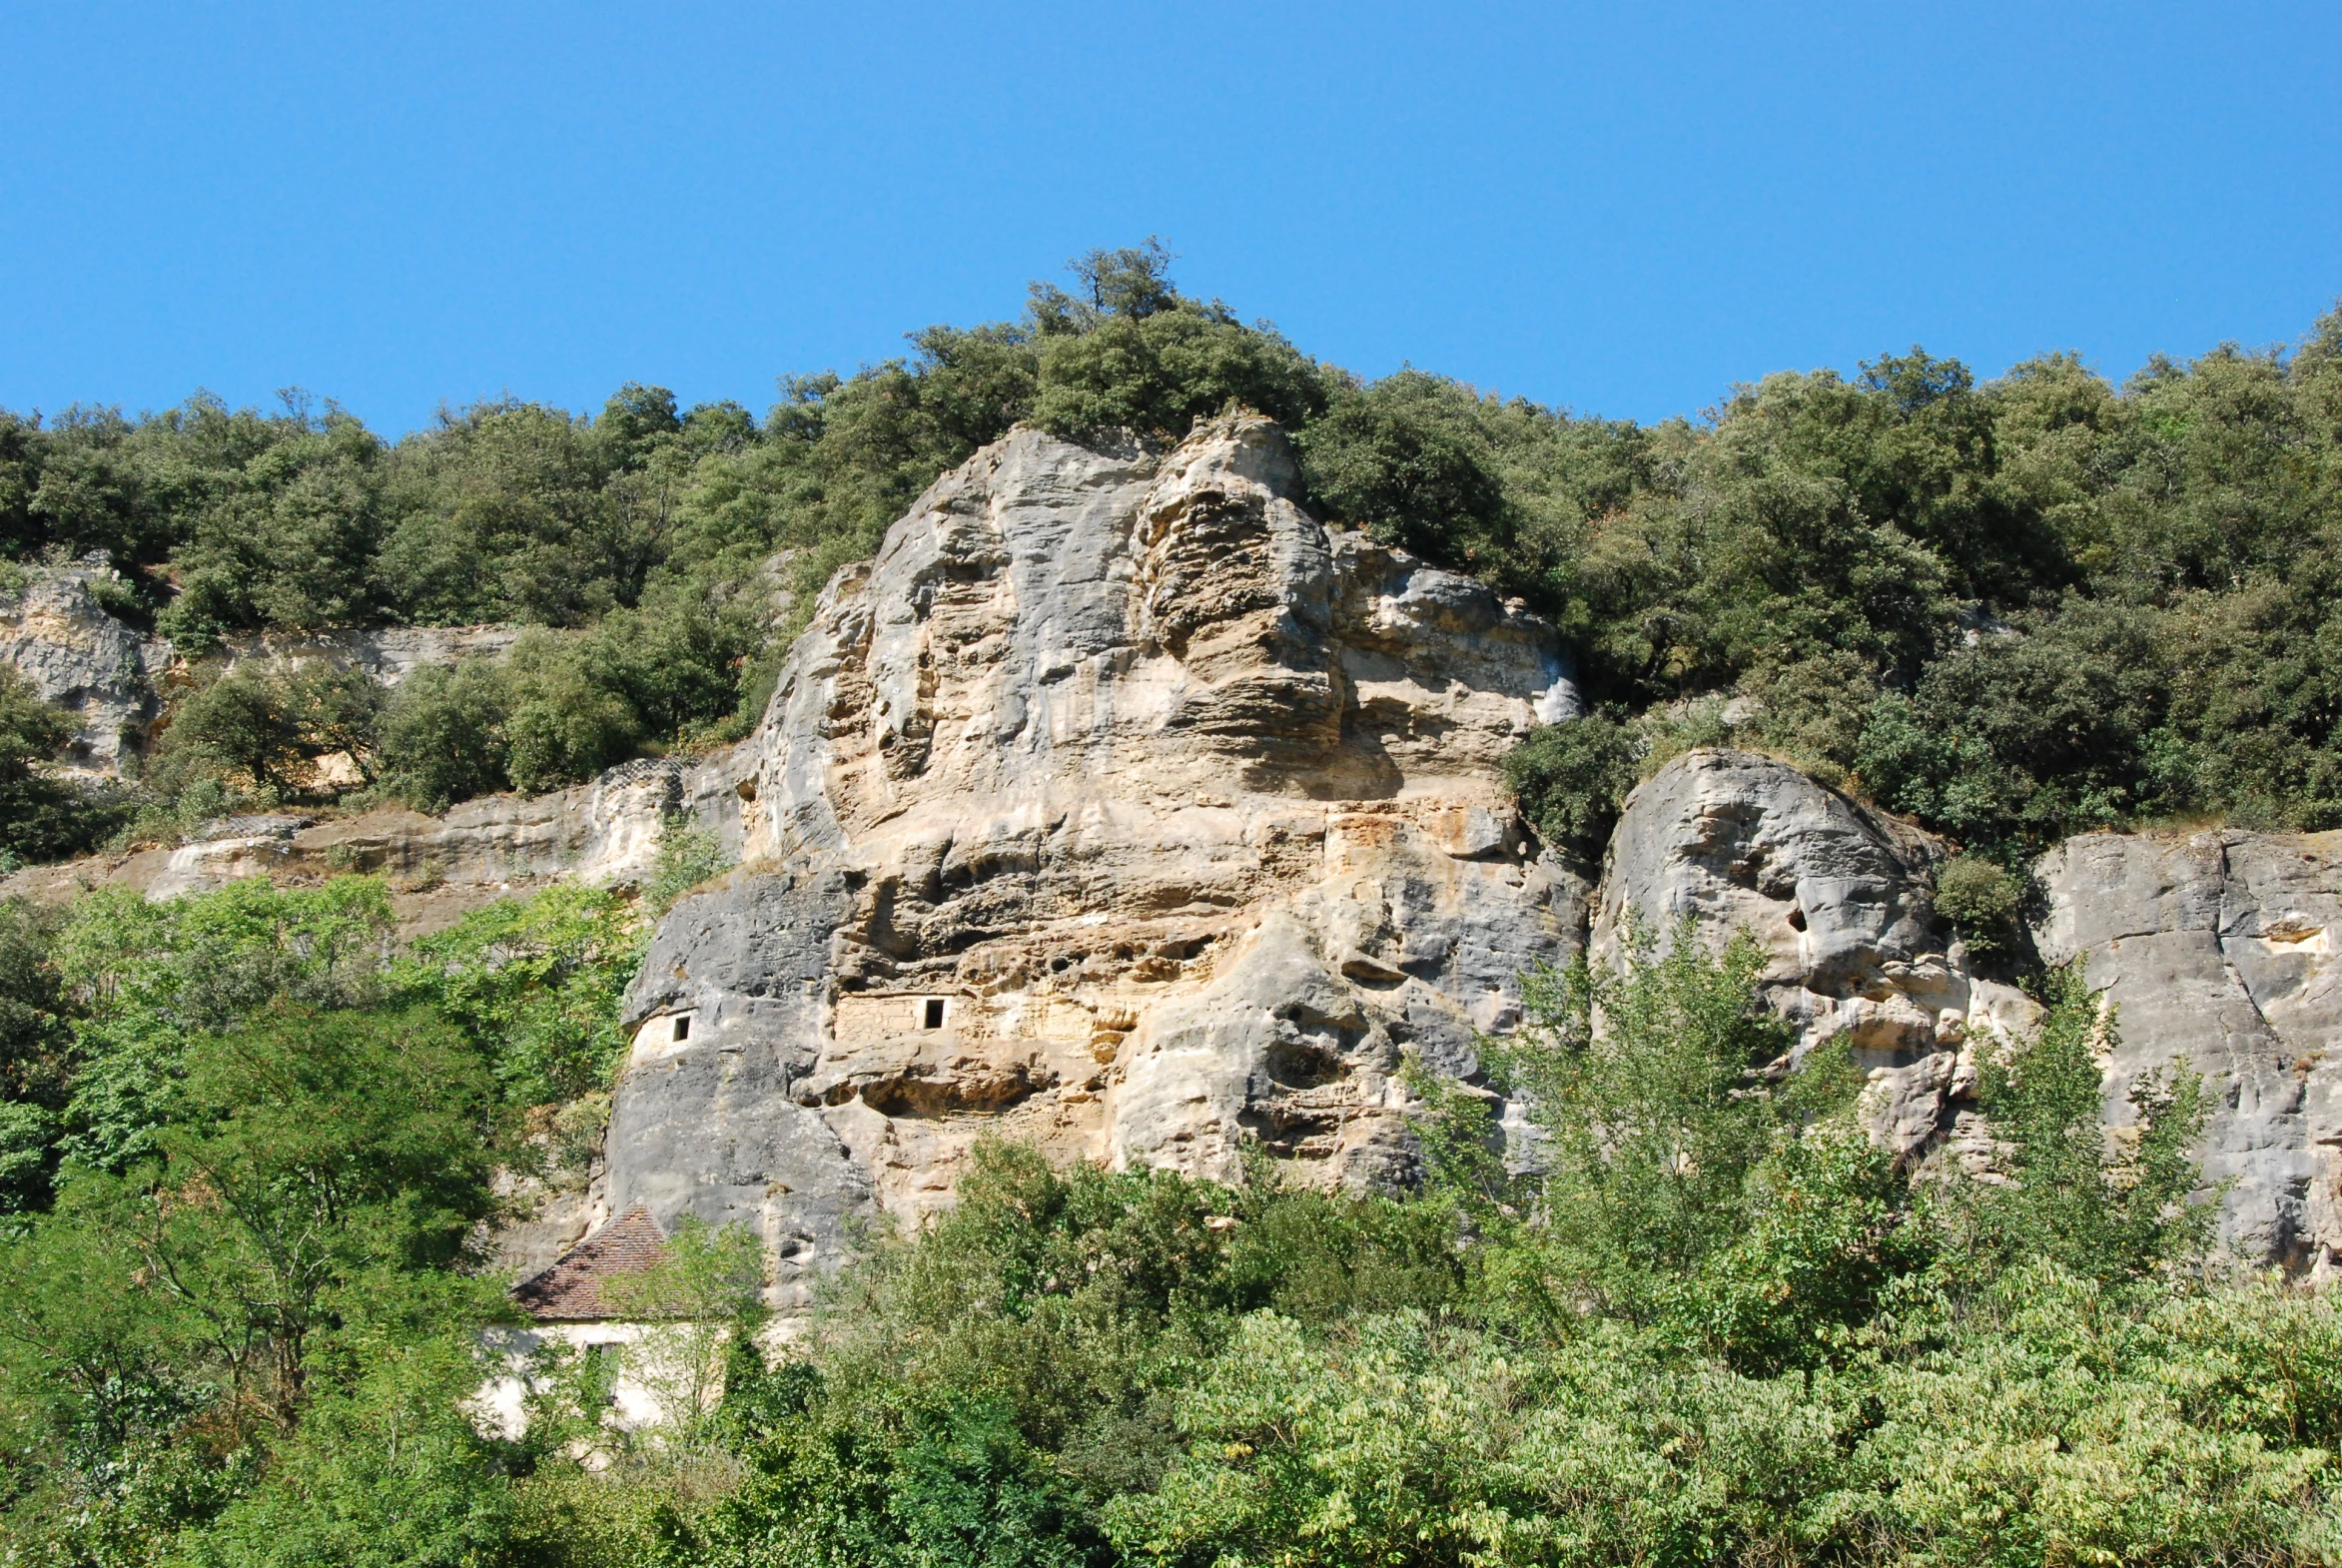 a close up view of rock formation with trees in the background